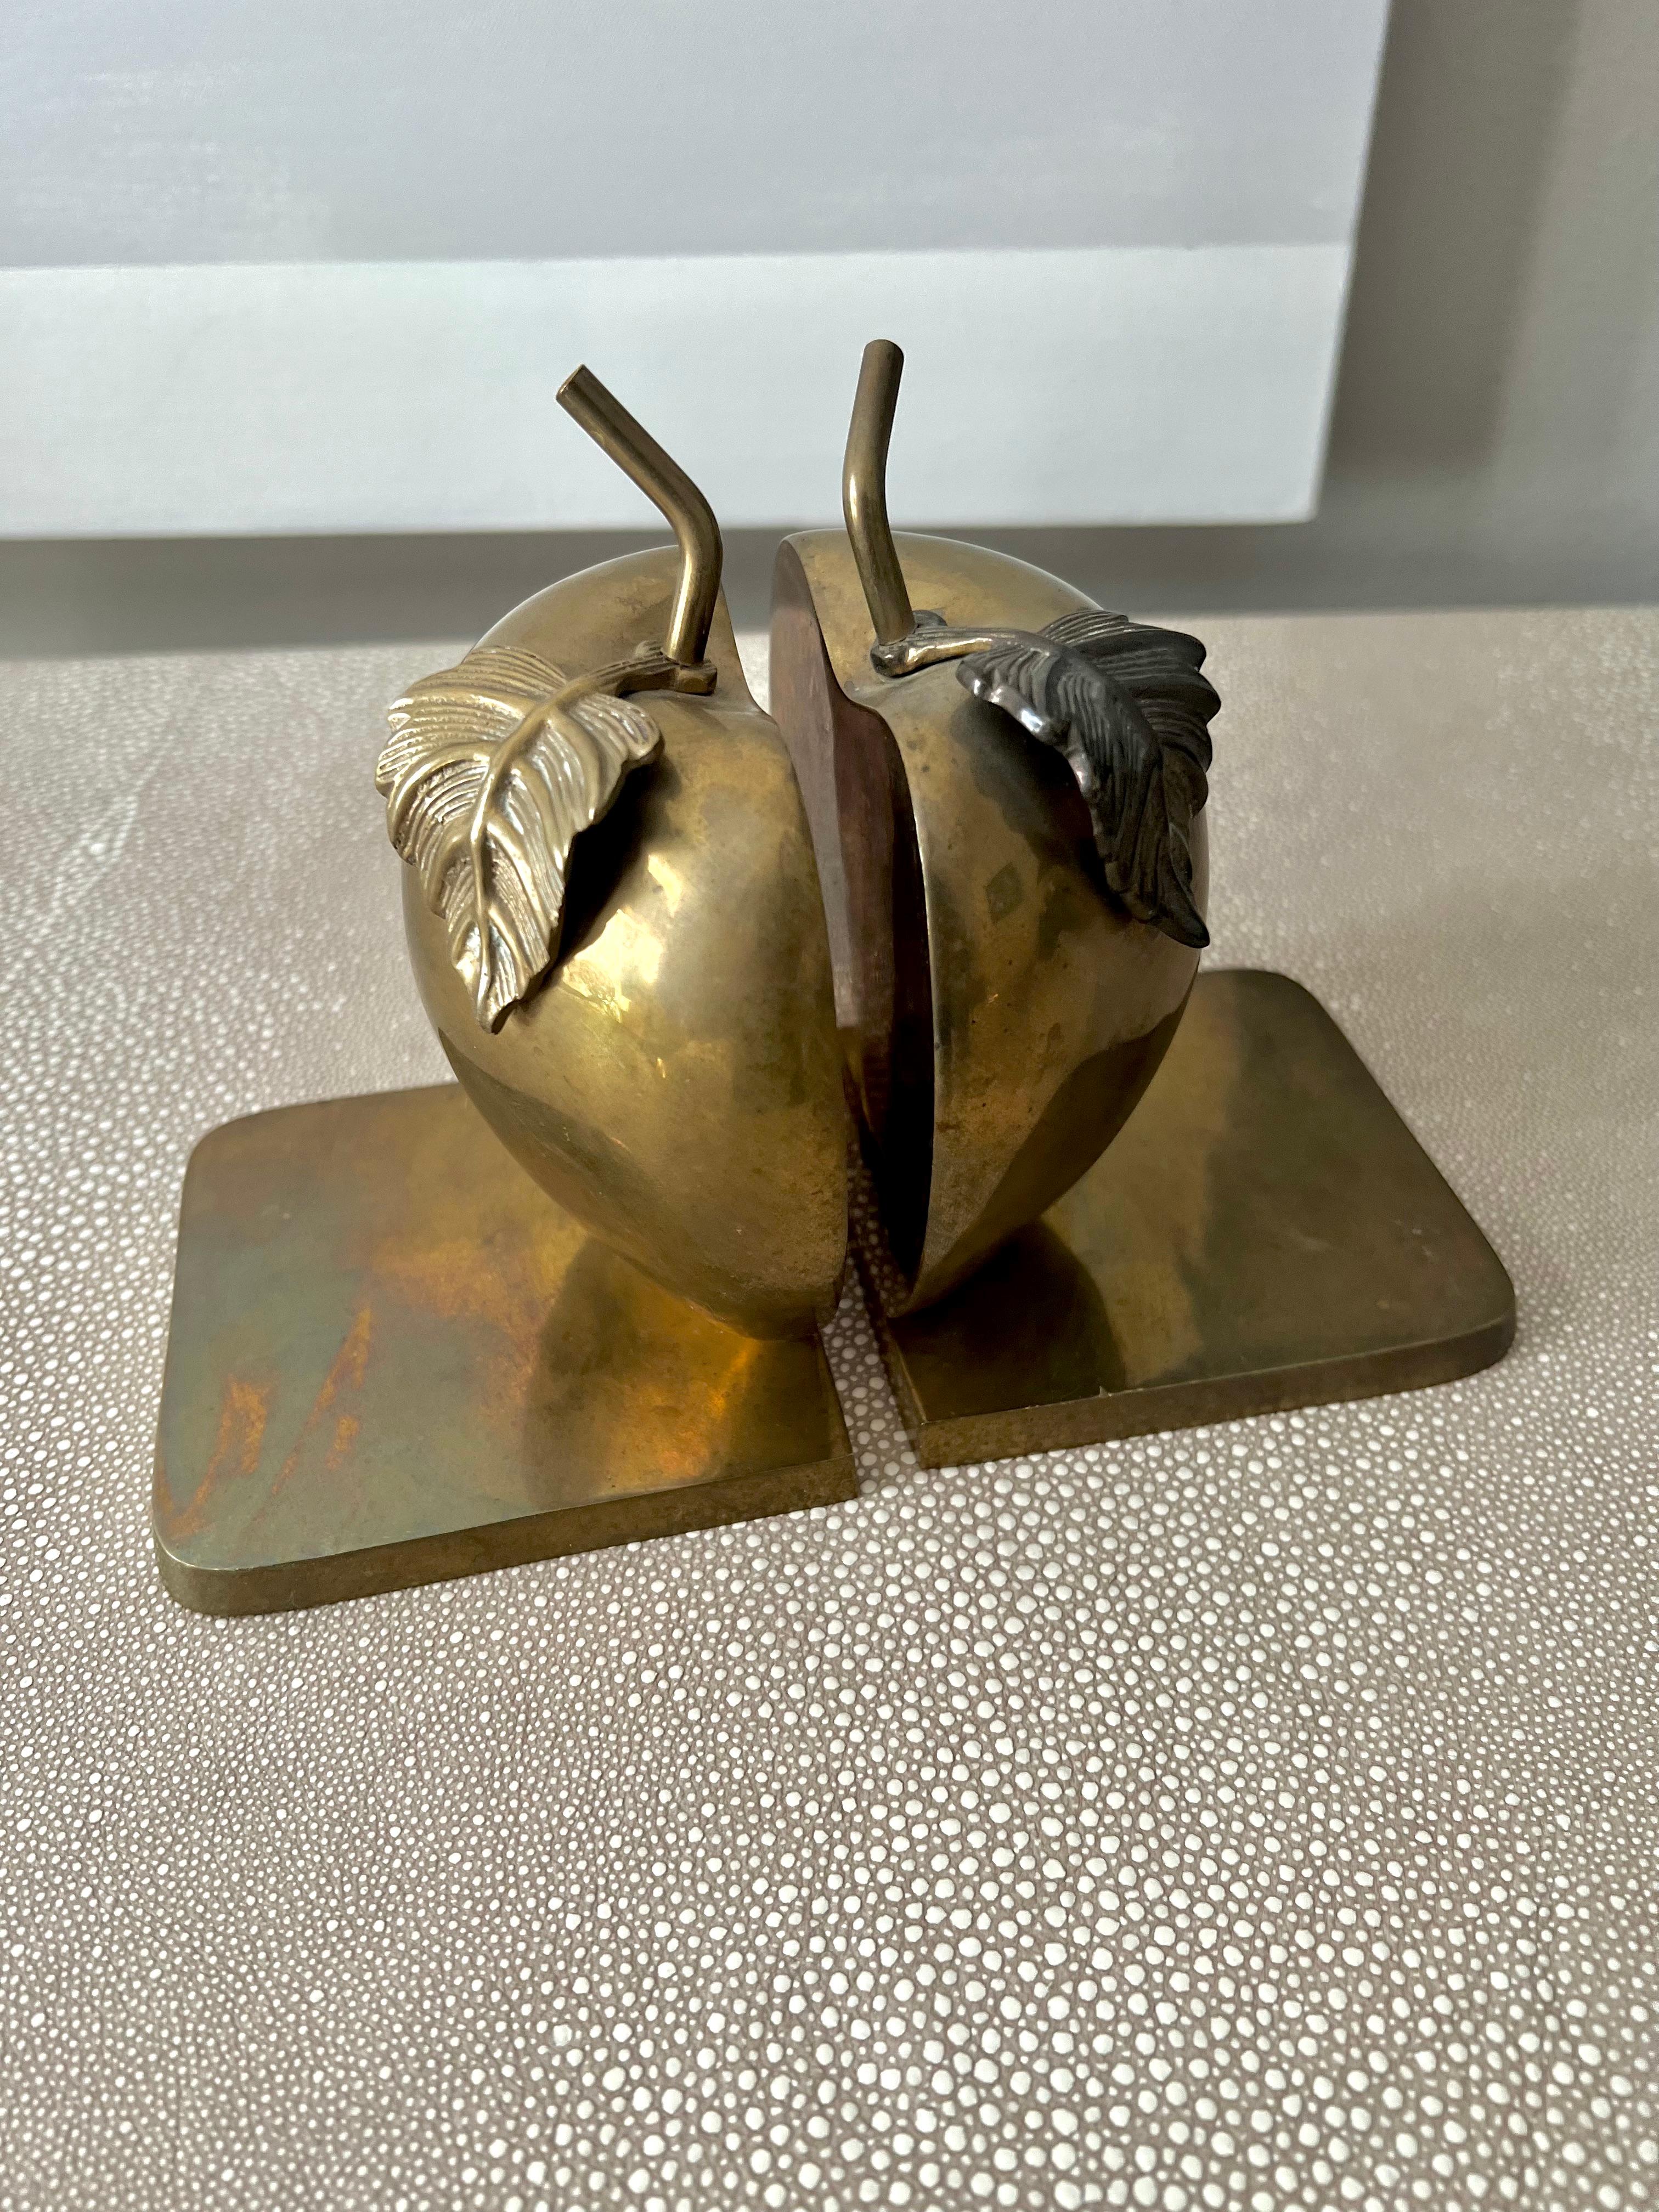 Pair of Brass Bookends that make up an apple and leaves.  The piece is a compliment to many spaces - any bookshelf, and especially those in the kitchen, work station or Childs room.

The patinated quality of the brass is phenomenal, however, with a